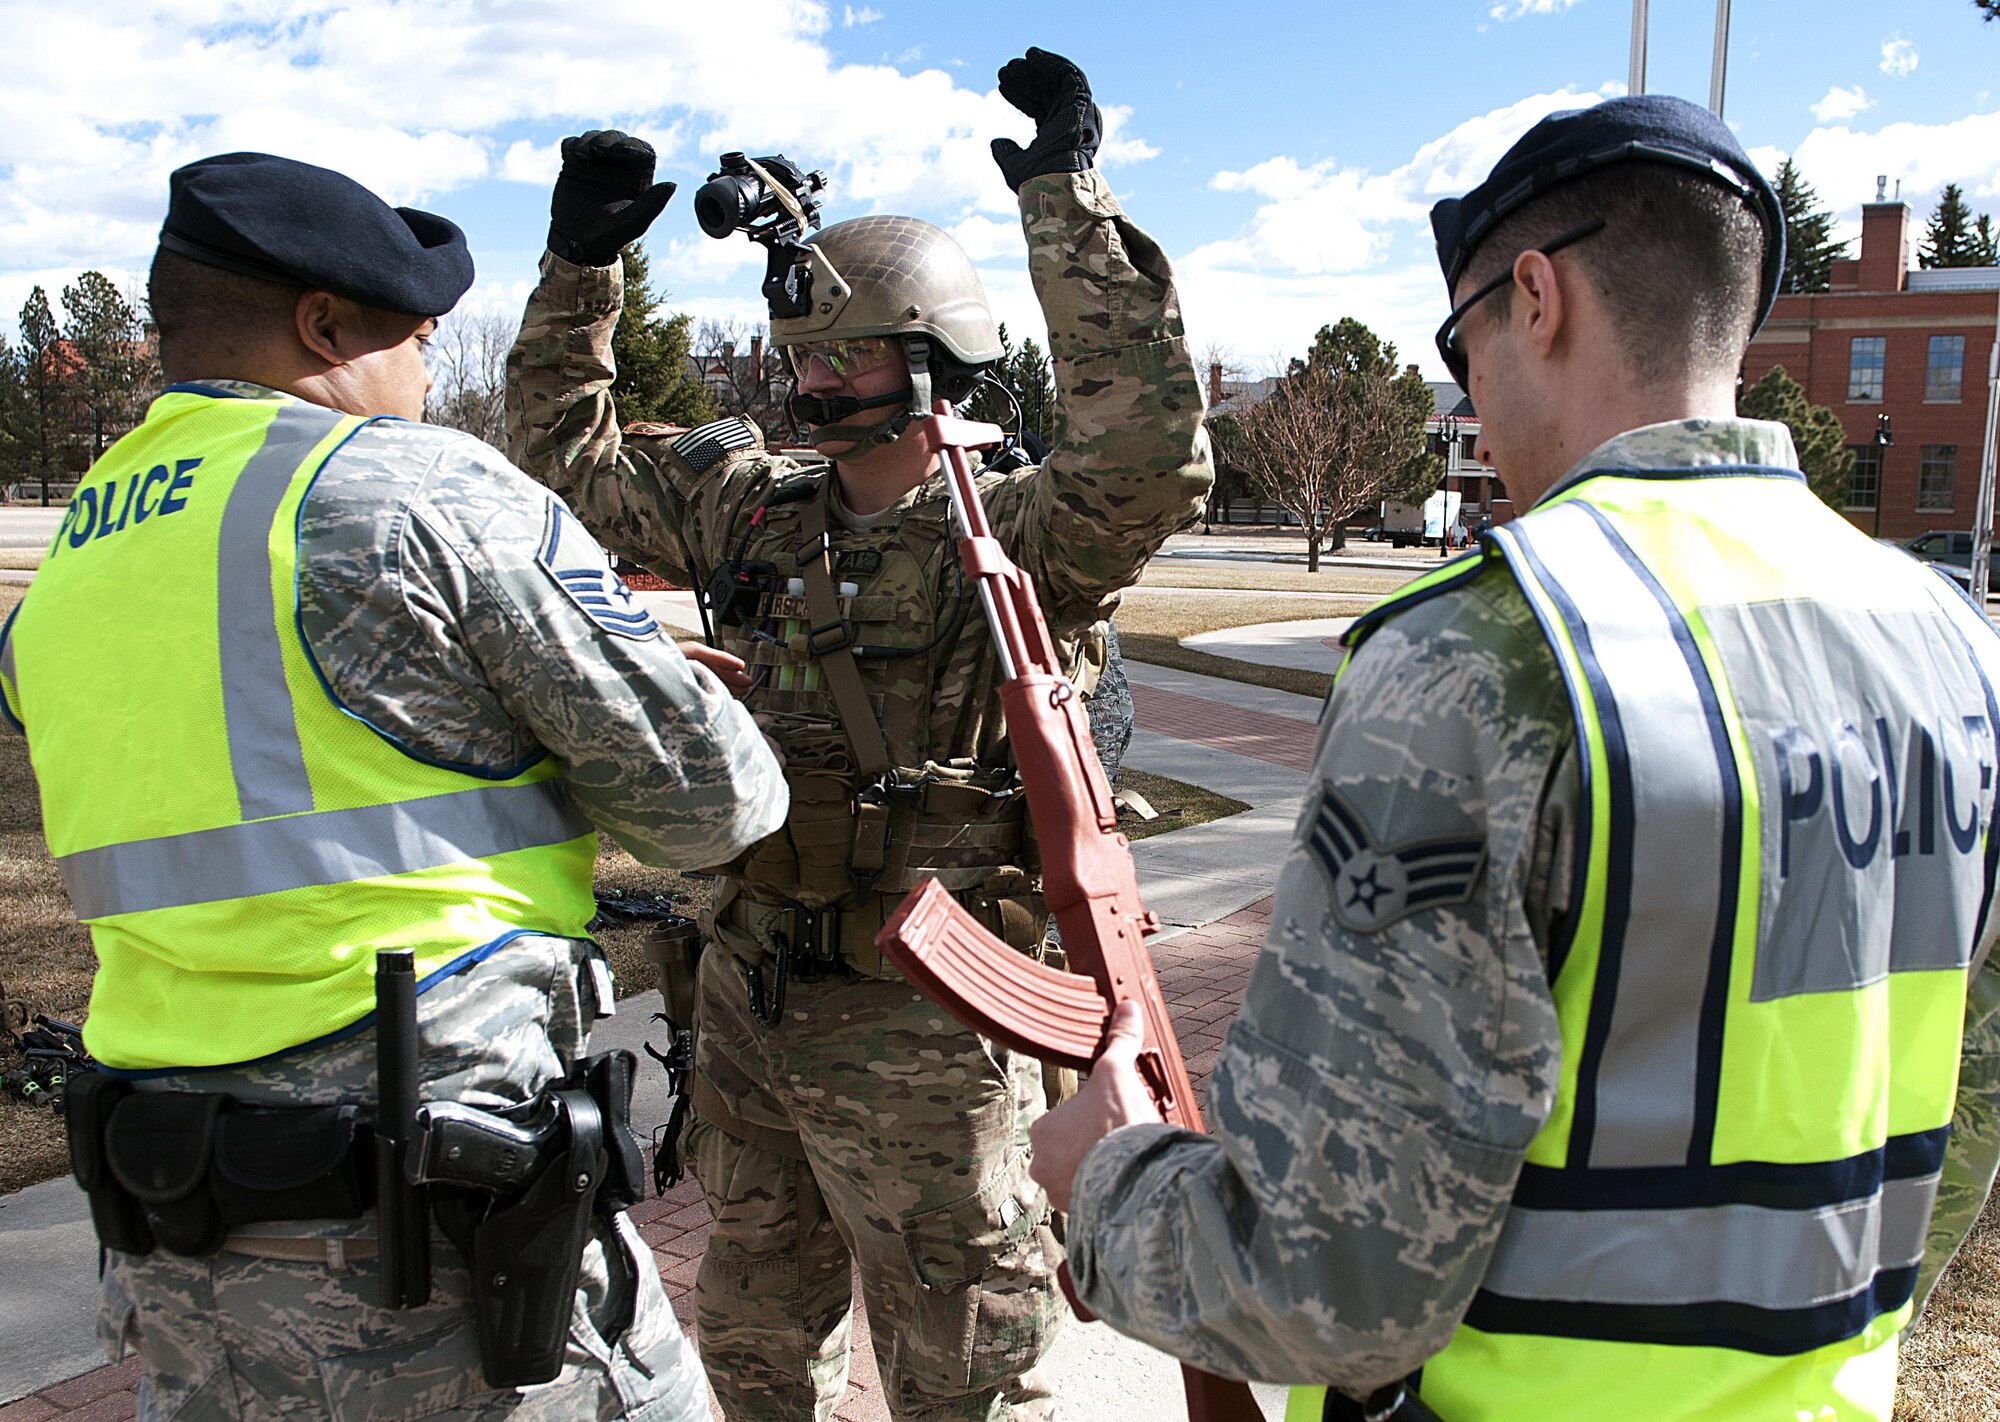 Master Sgt. Paul Eversley, 90th Security Forces Squadron Plans and Programs superintendent, verifies that there is no live ammunition on Airman 1st Class Donovan Hirschfeld, 790th Missile Security Forces Squadron Tactical Response Force member, Feb. 29, 2016, to ensure the safety of all participants during an active shooter exercise at the base theater on F.E. Warren Air Force Base, Wyo. (U.S. Air Force photo by Airman 1st Class Malcolm Mayfield)